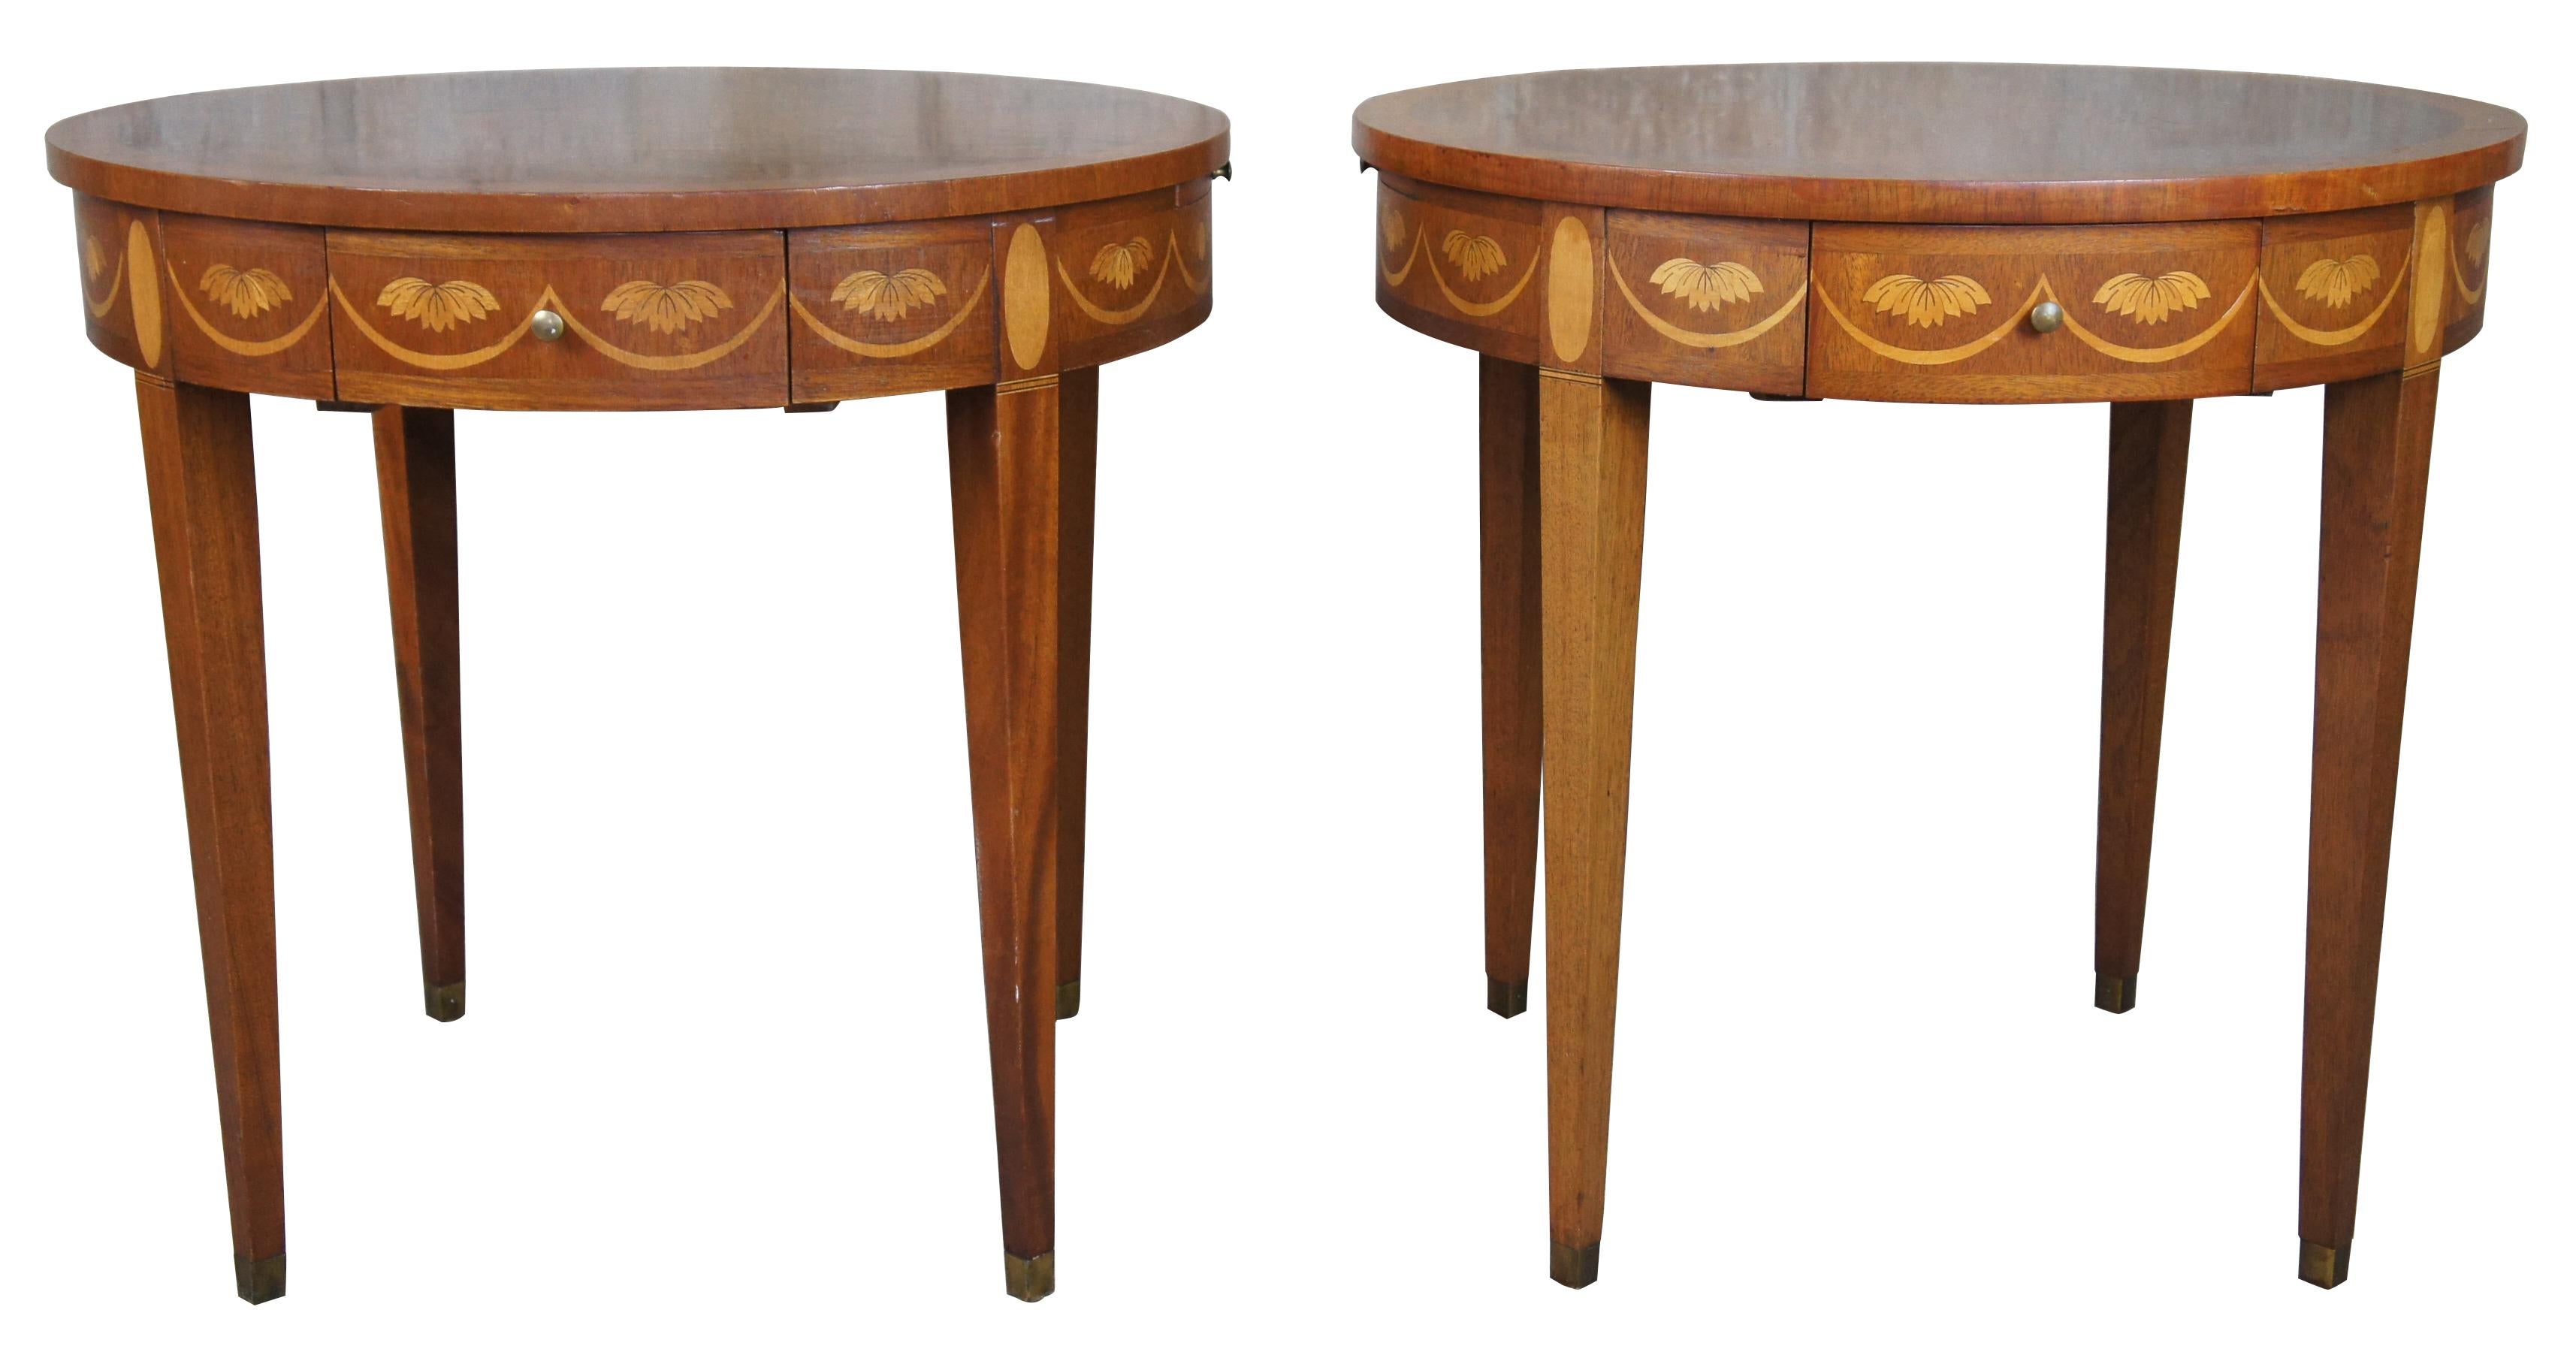 Baker Chippendale round inlaid side end table with pullout tray flame mahogany burl

A pair of flame mahogany round side tables by Baker Furniture, attributed to the Historic Charleston collection. The round tops with satinwood banding with side